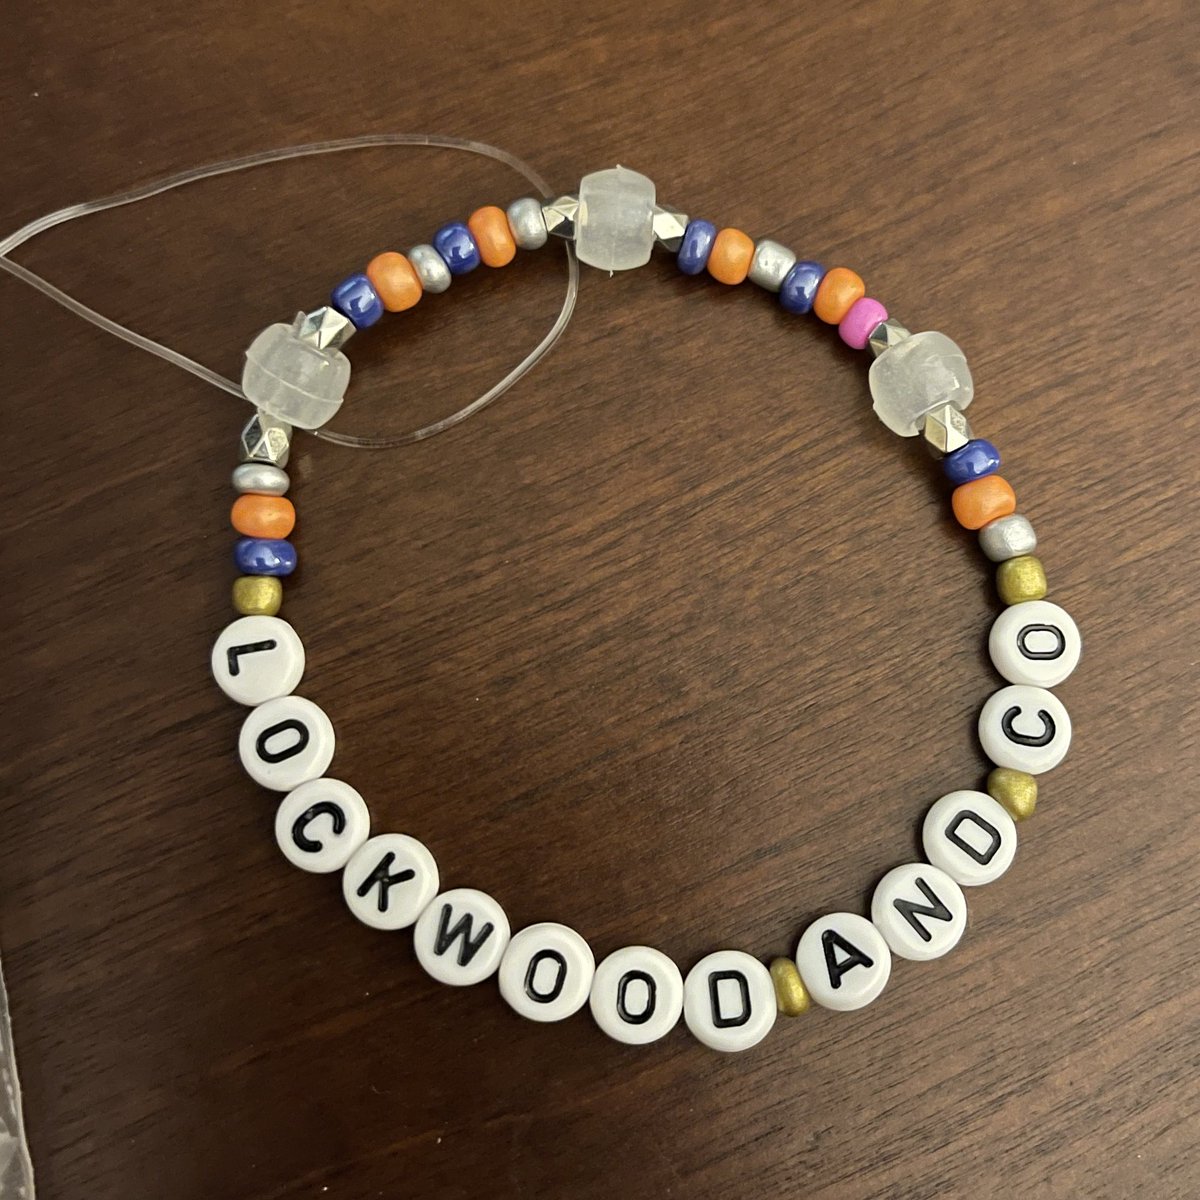 I did end up making a Lockwood and Co bracelet 😄 I didn’t have black beads, so I did silver, orange, and blue for the Iron Trio (with one little pink bead for Lockwood’s pink socks🩷)👻⚔️🖤
#SaveLockwoodandCo #LockNationCraftersDay